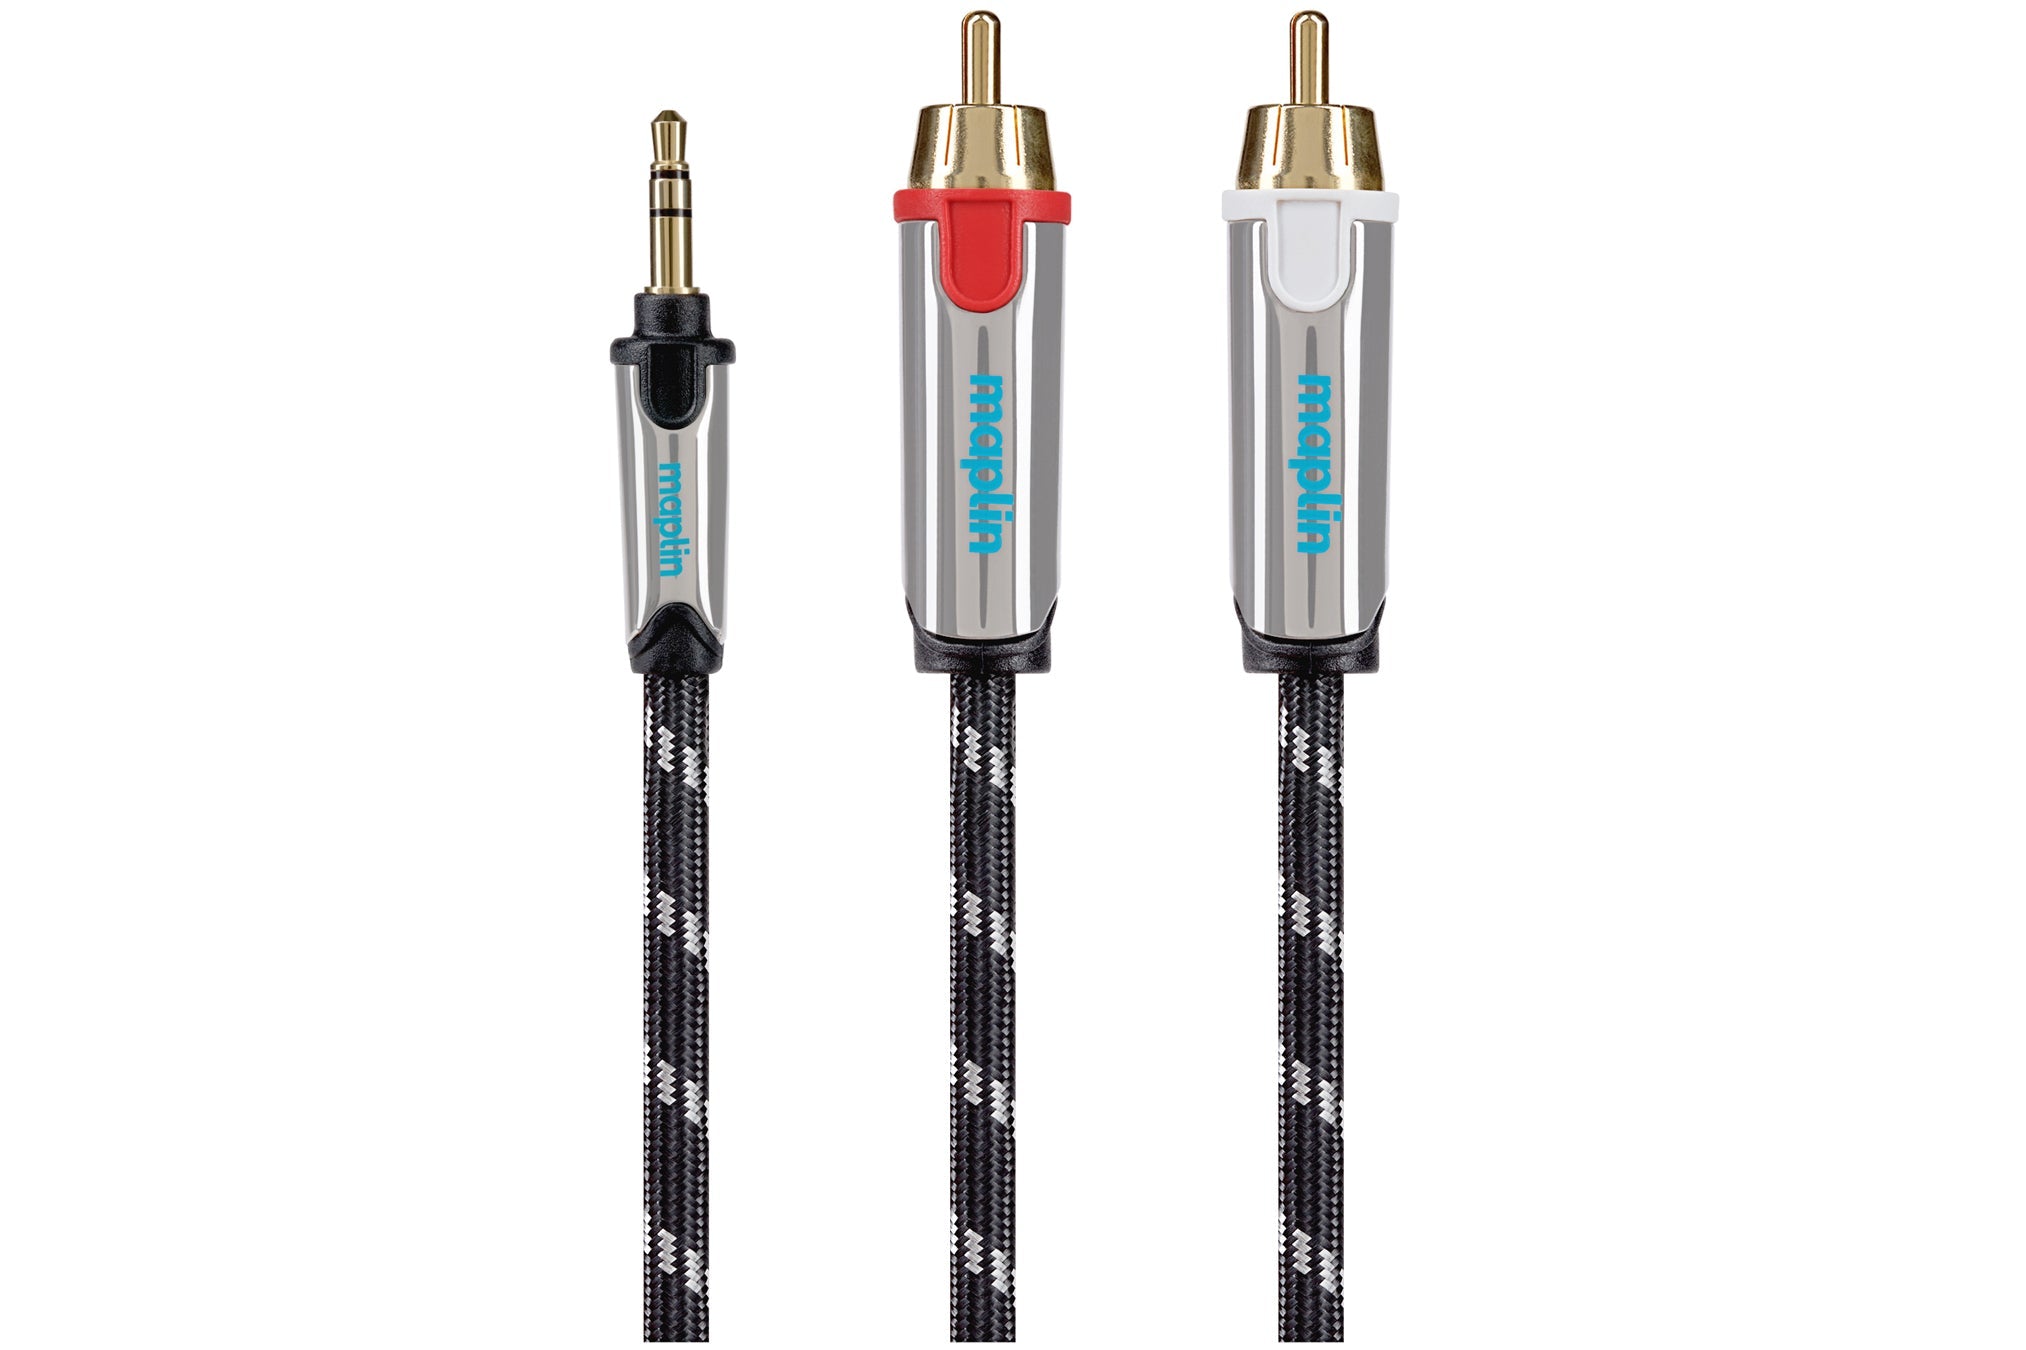 Maplin Pro 3.5mm Aux Stereo 3-Pole Jack Plug to Twin RCA Phono Braided Cable - Black, 5m